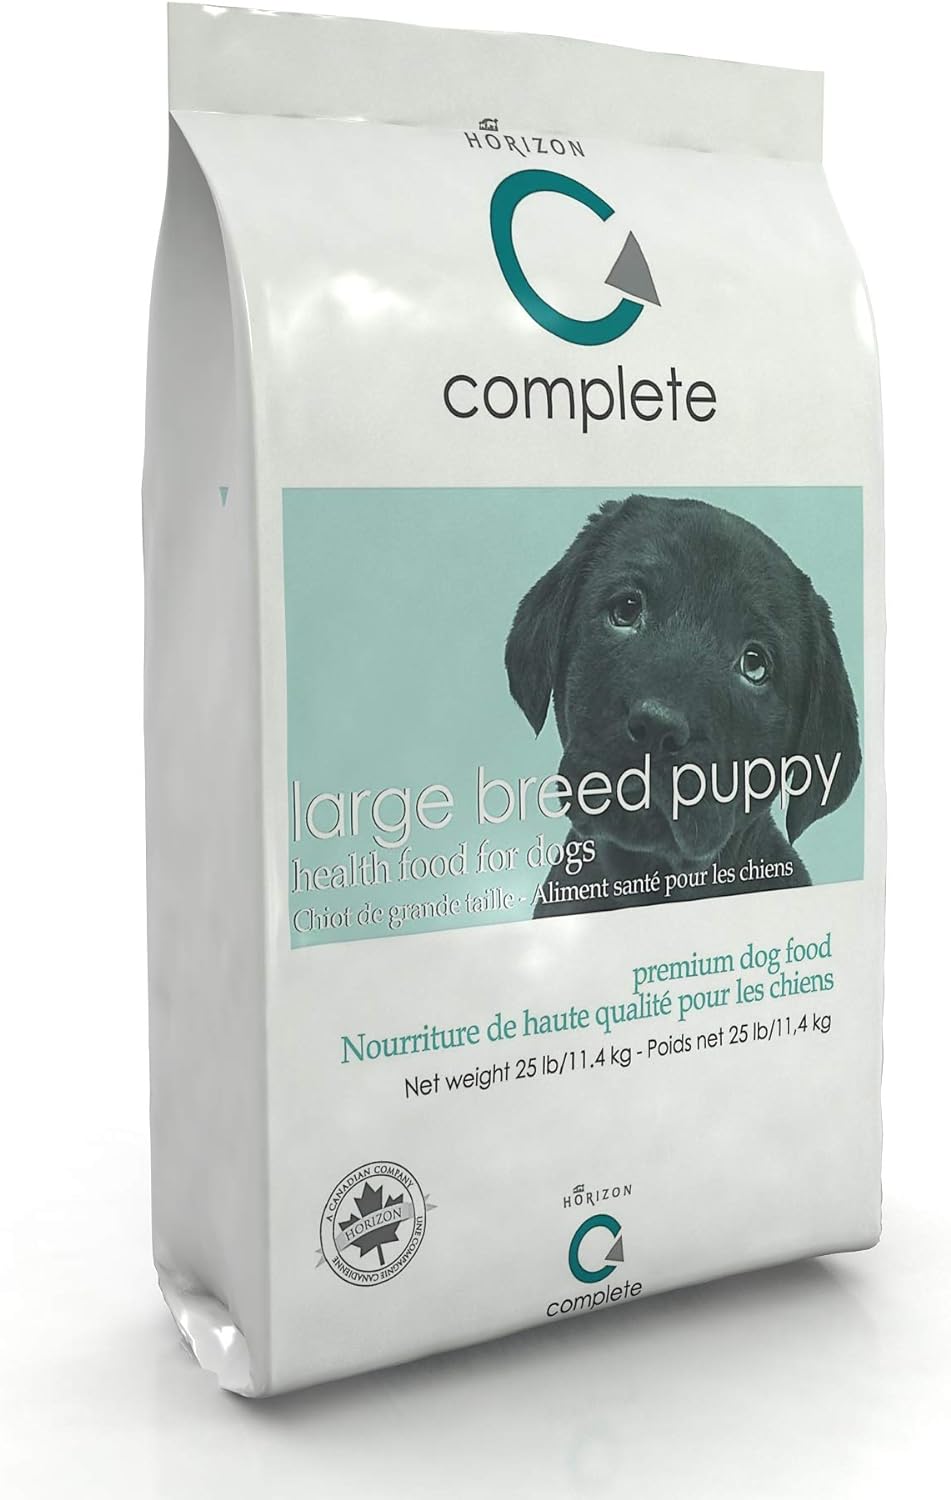 Horizon Complete Whole Grain Large Breed Puppy Chicken Formula Dry Dog Food – Gallery Image 1